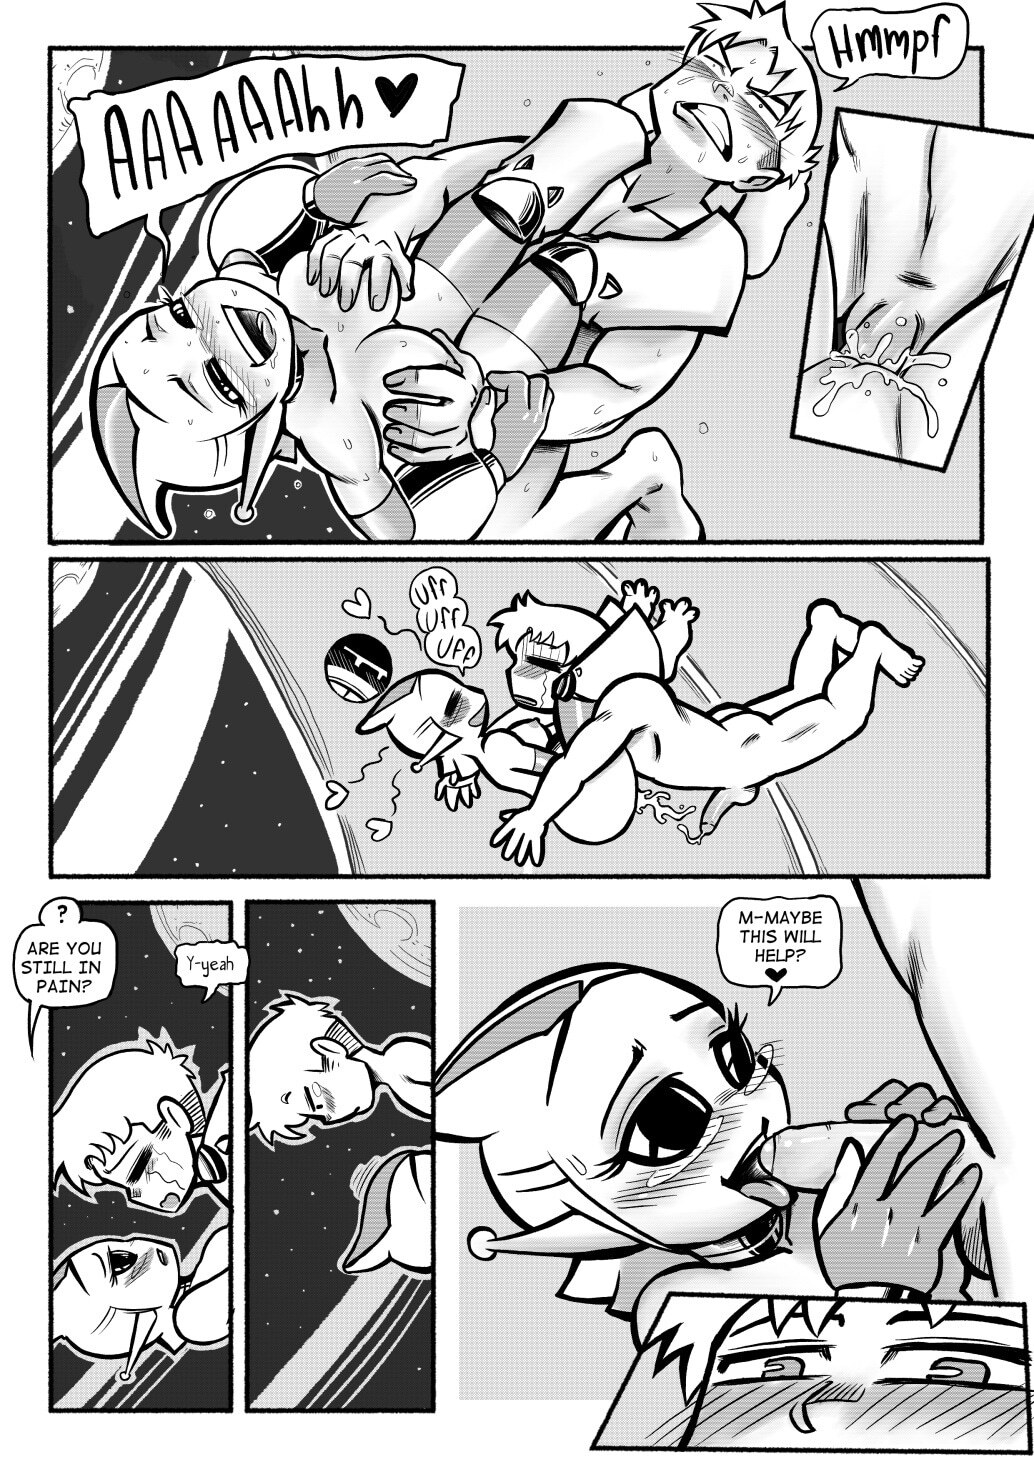 Abducted! - Mr.E - Page 25